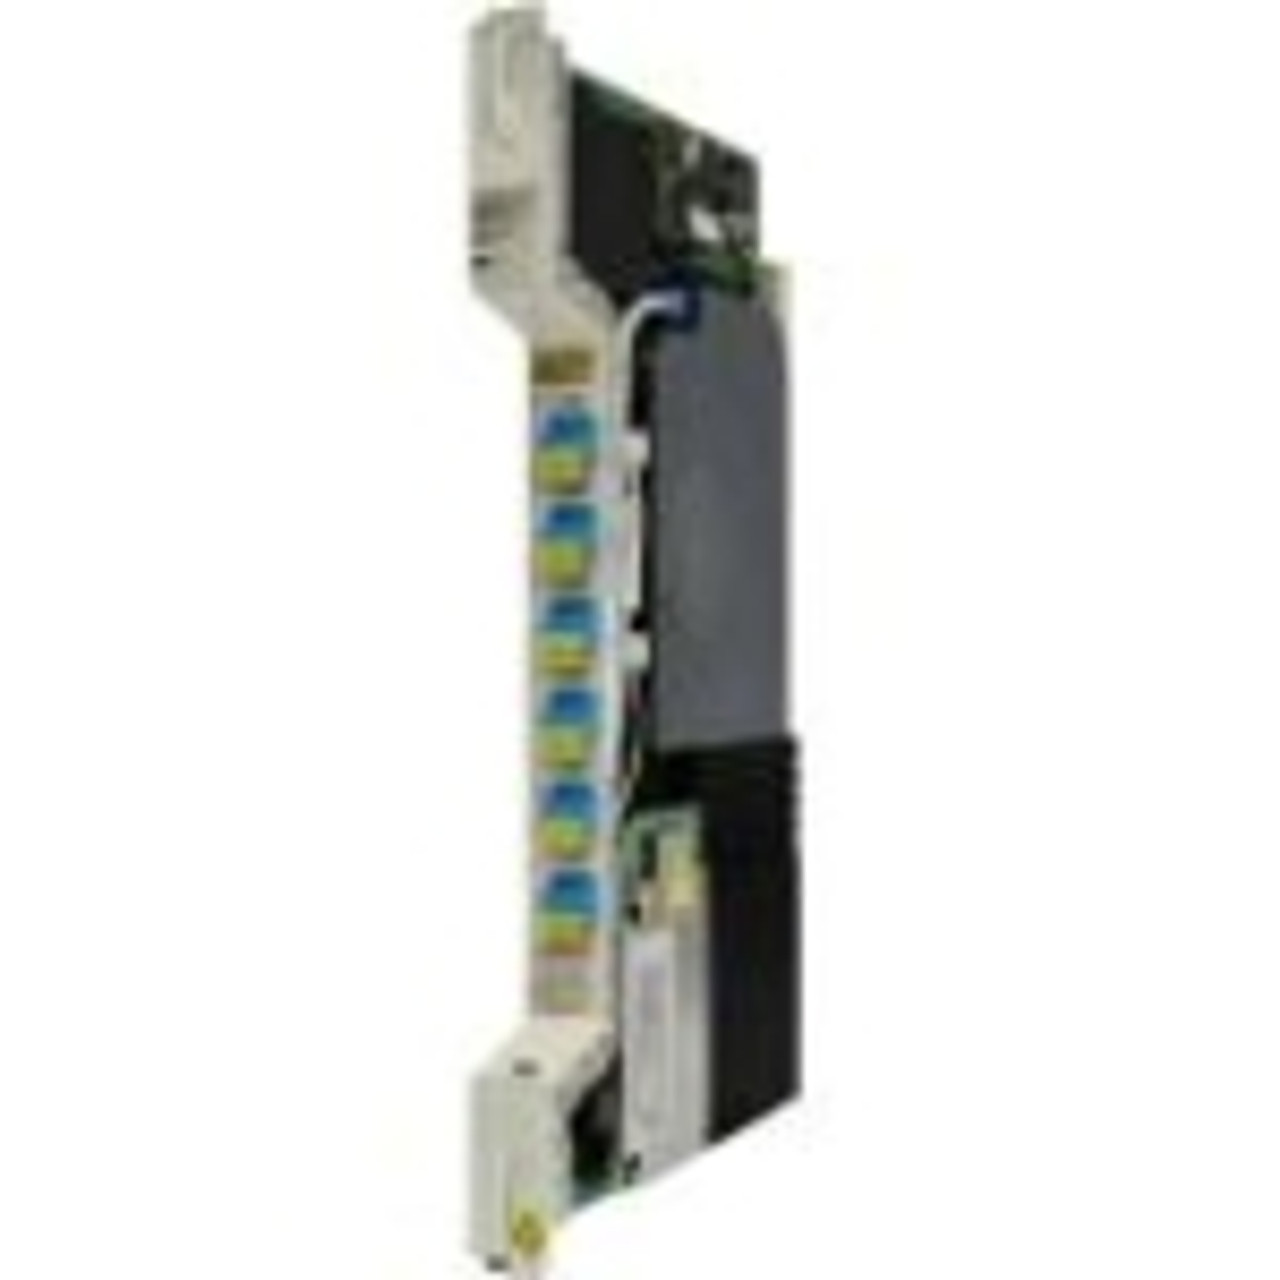 15454-40-SMR1-C= Cisco 40ch Sgl Mod Roadm with Integrated Op Pre Amp (Refurbished)